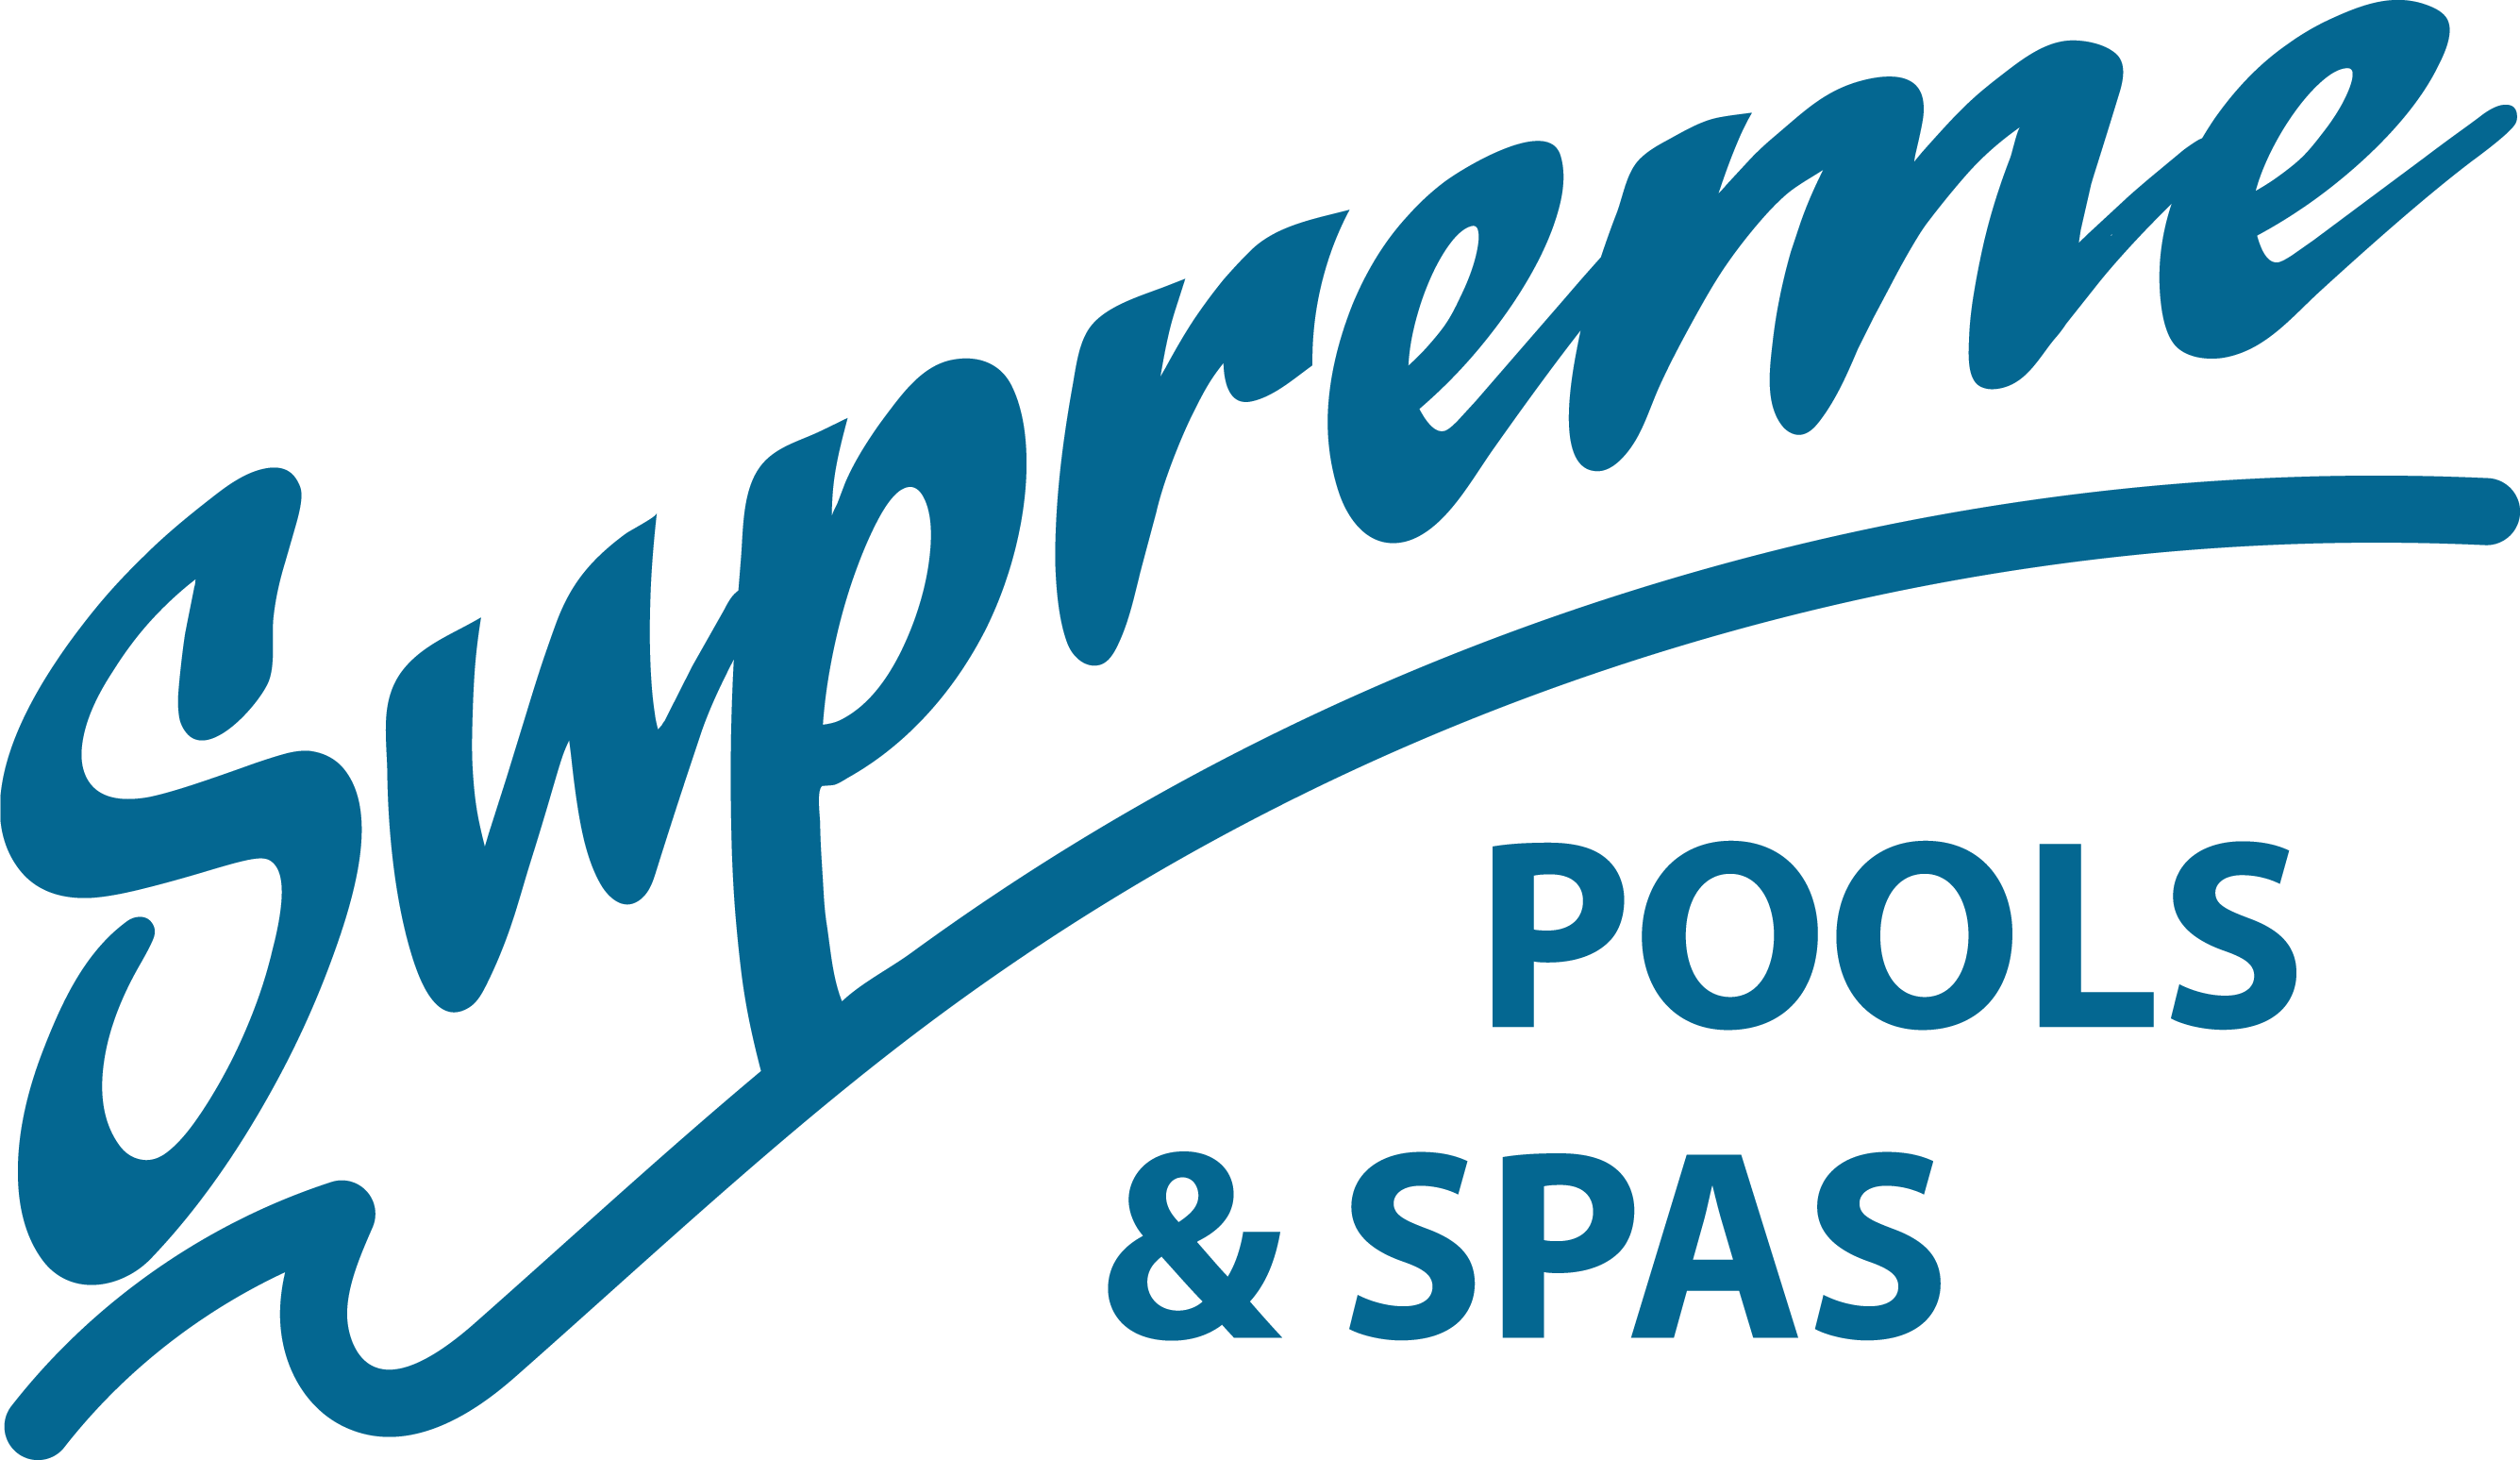 Supreme Pools and Spas in Oaks Woodlake (Houston Area)